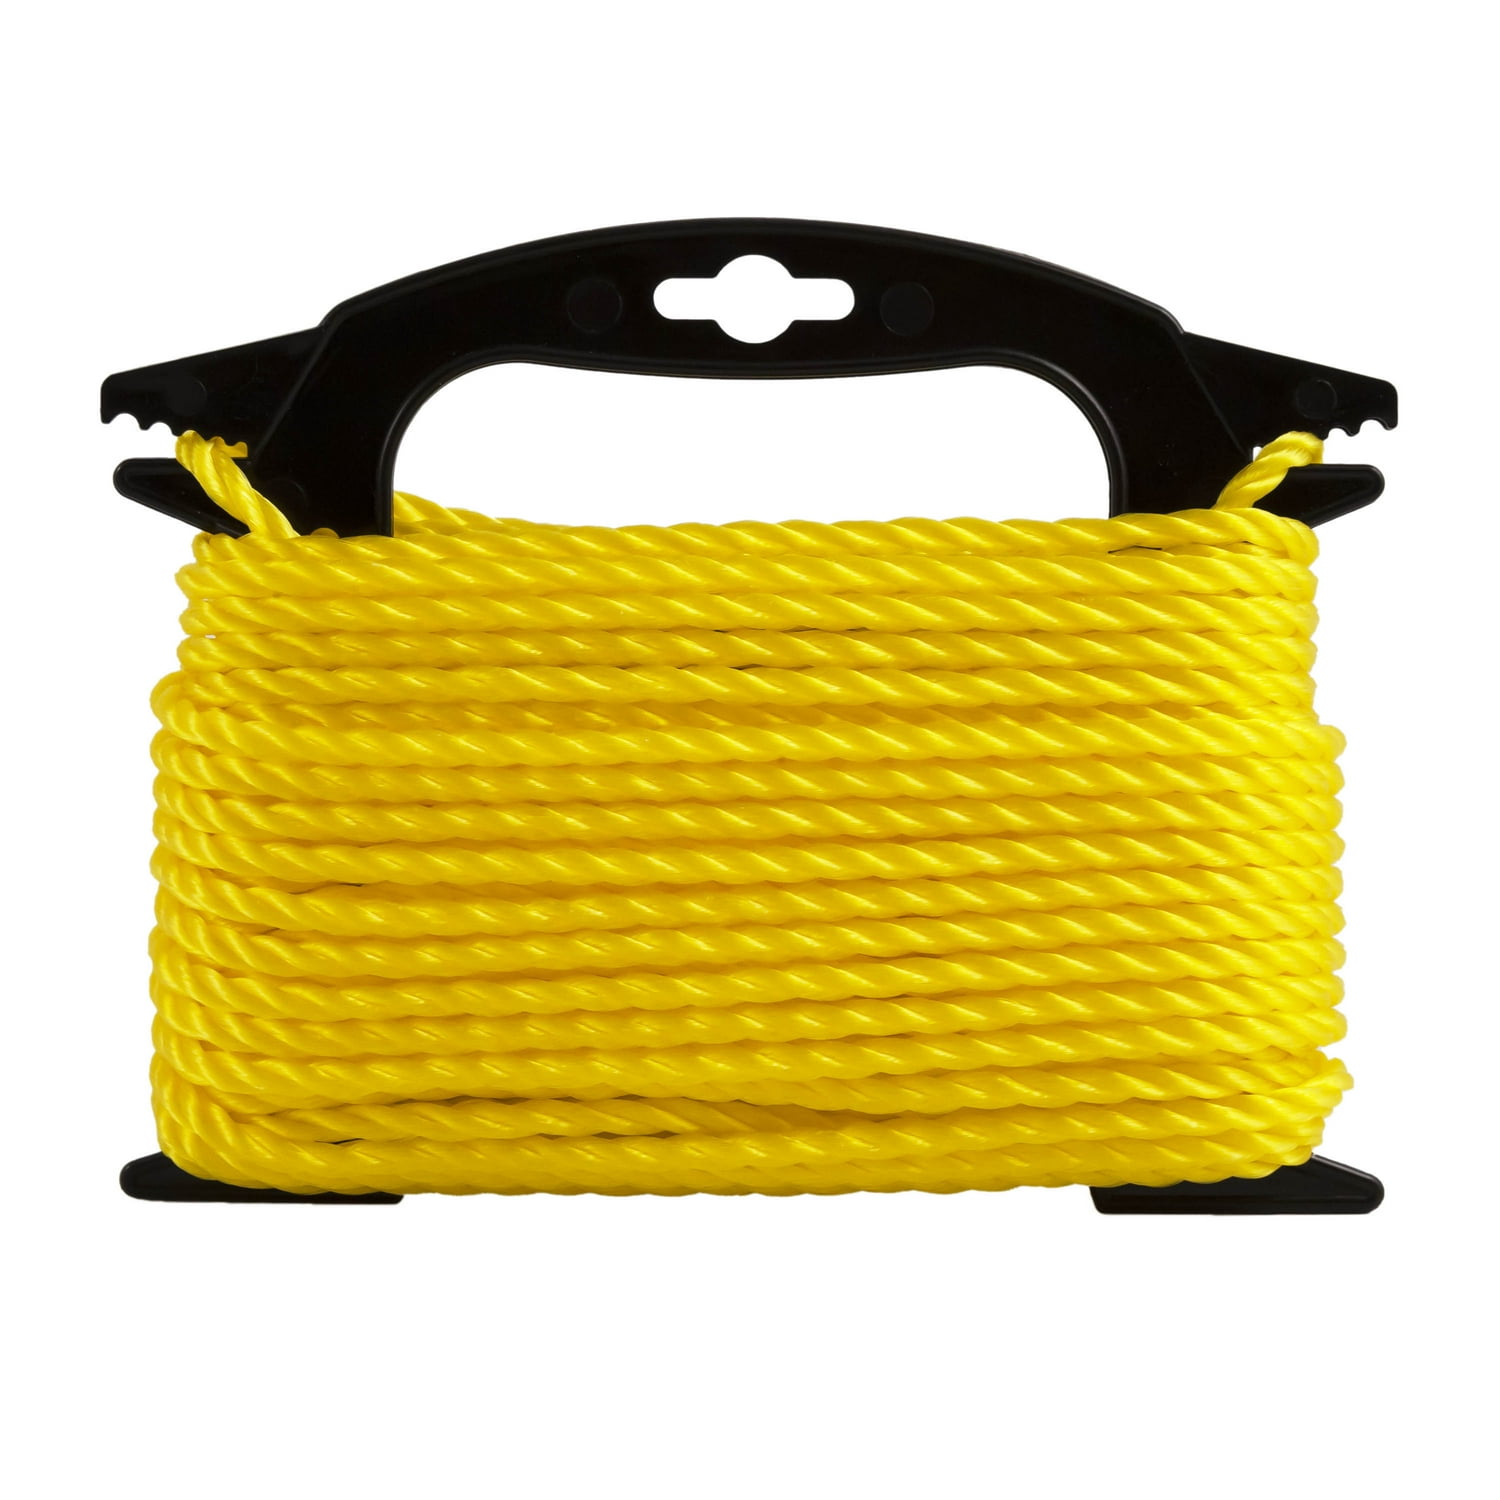 1/4" Hyper Tough Polypropylene Twisted Rope (Yellow): 50' for $2.12 or 100' for $3.47 + Free S&H w/ Walmart+ or $35+